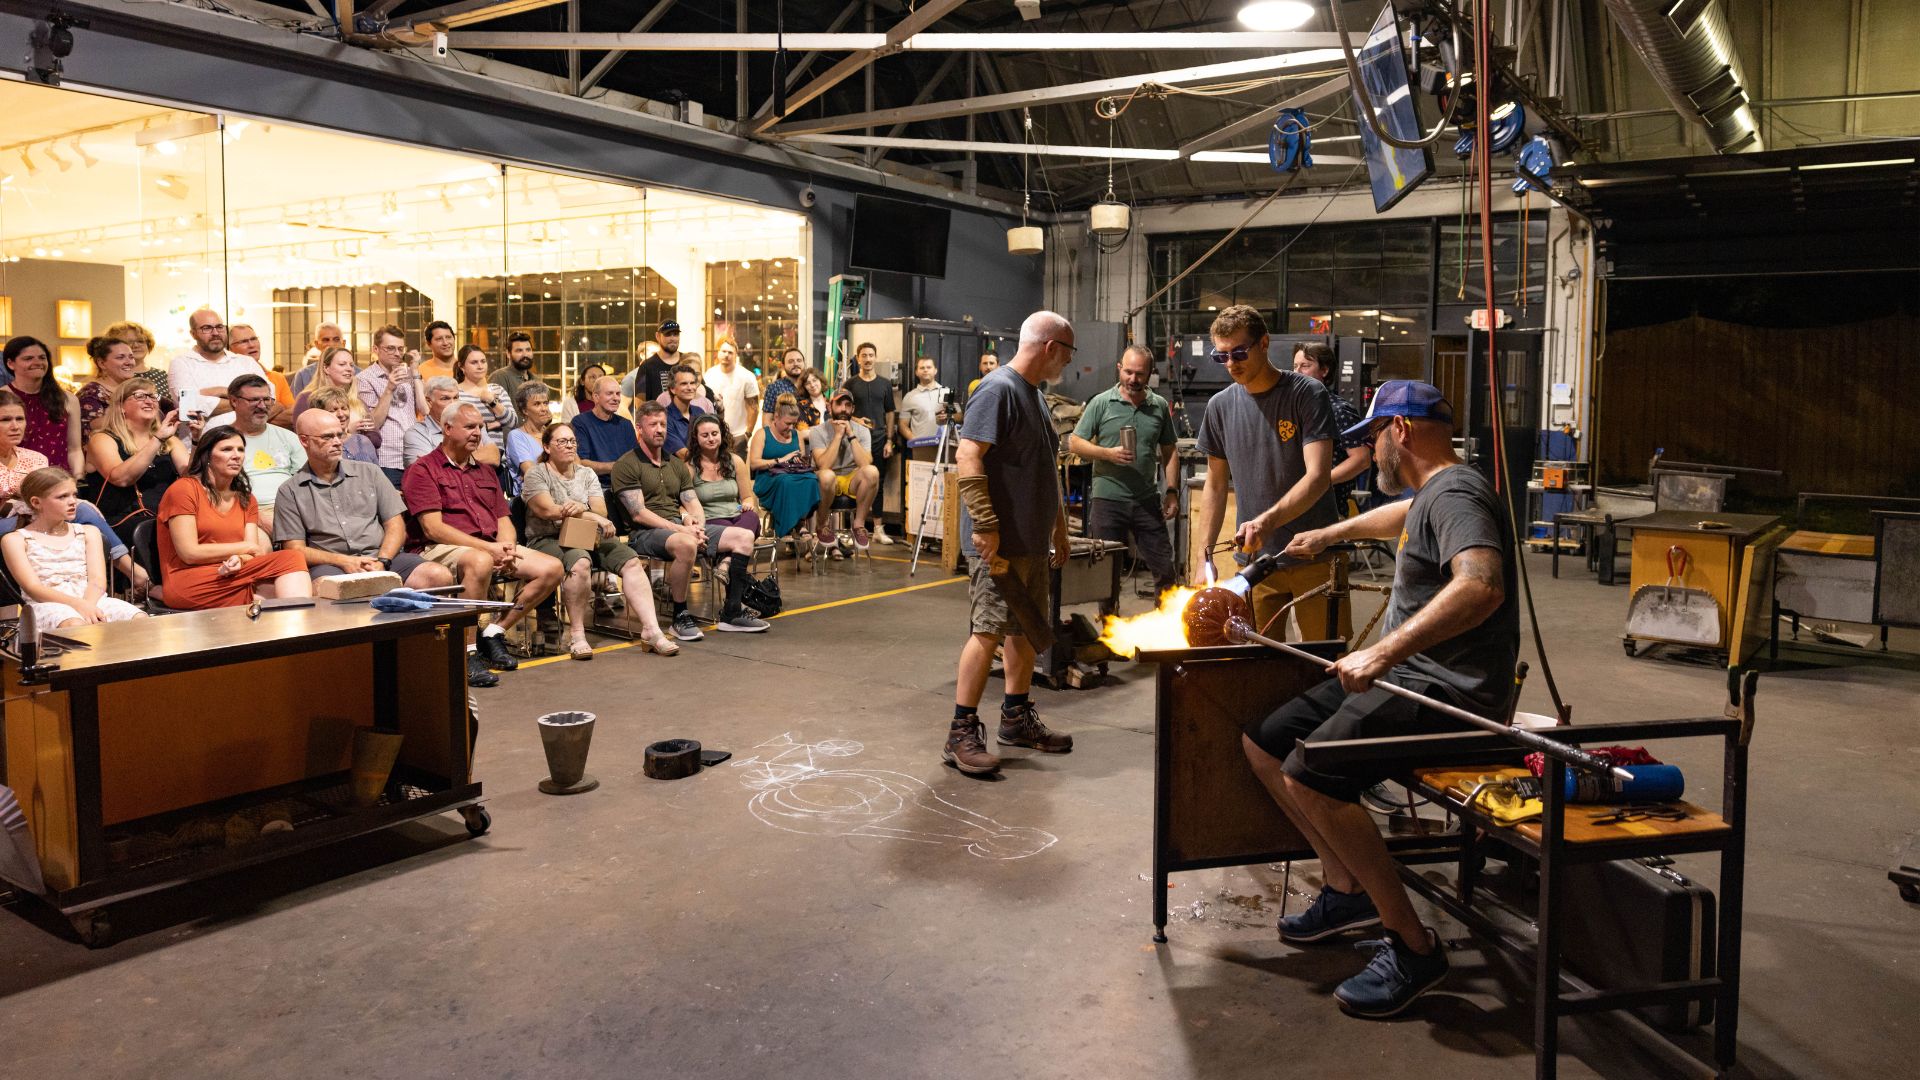 Guests watch a glass-blowing demonstration at Third Degree Glass Factory.